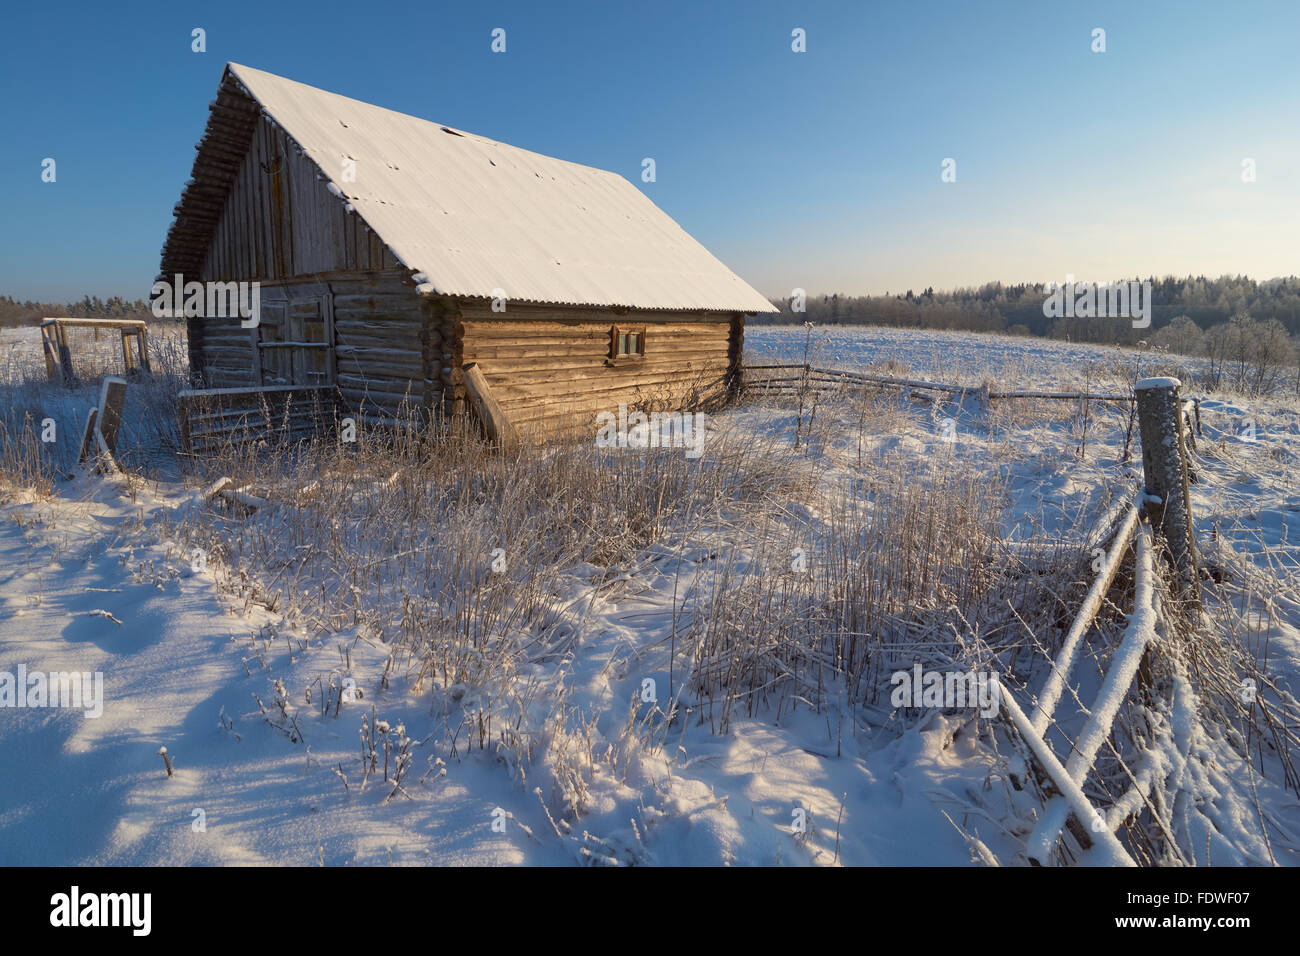 Old Wooden Log Barn Surrounded By A Fence Stock Photo, Picture and Royalty  Free Image. Image 19959936.